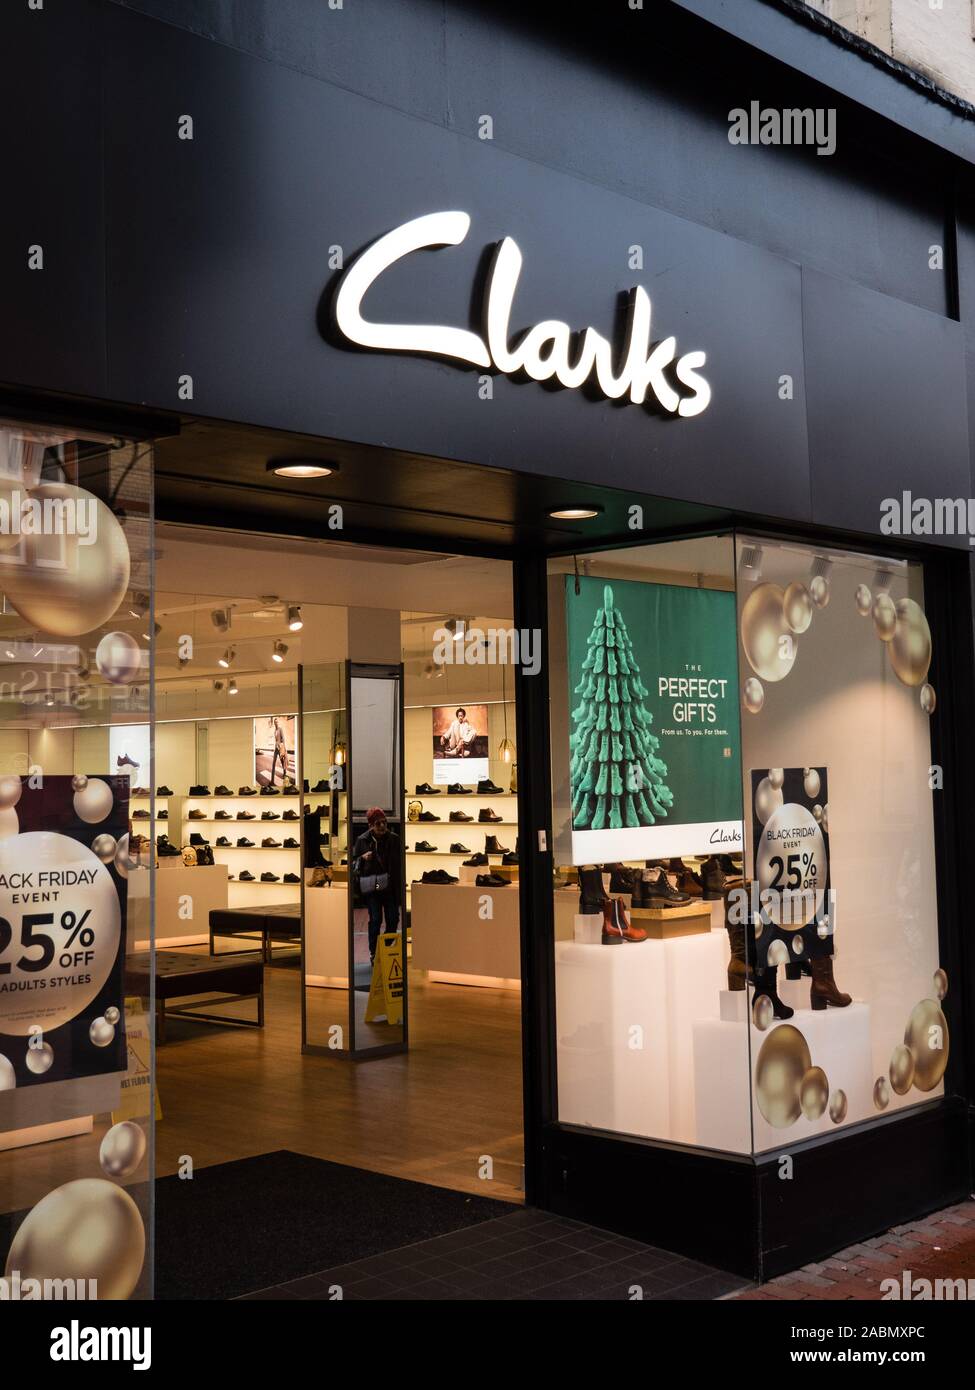 clarks shoe outlet locations